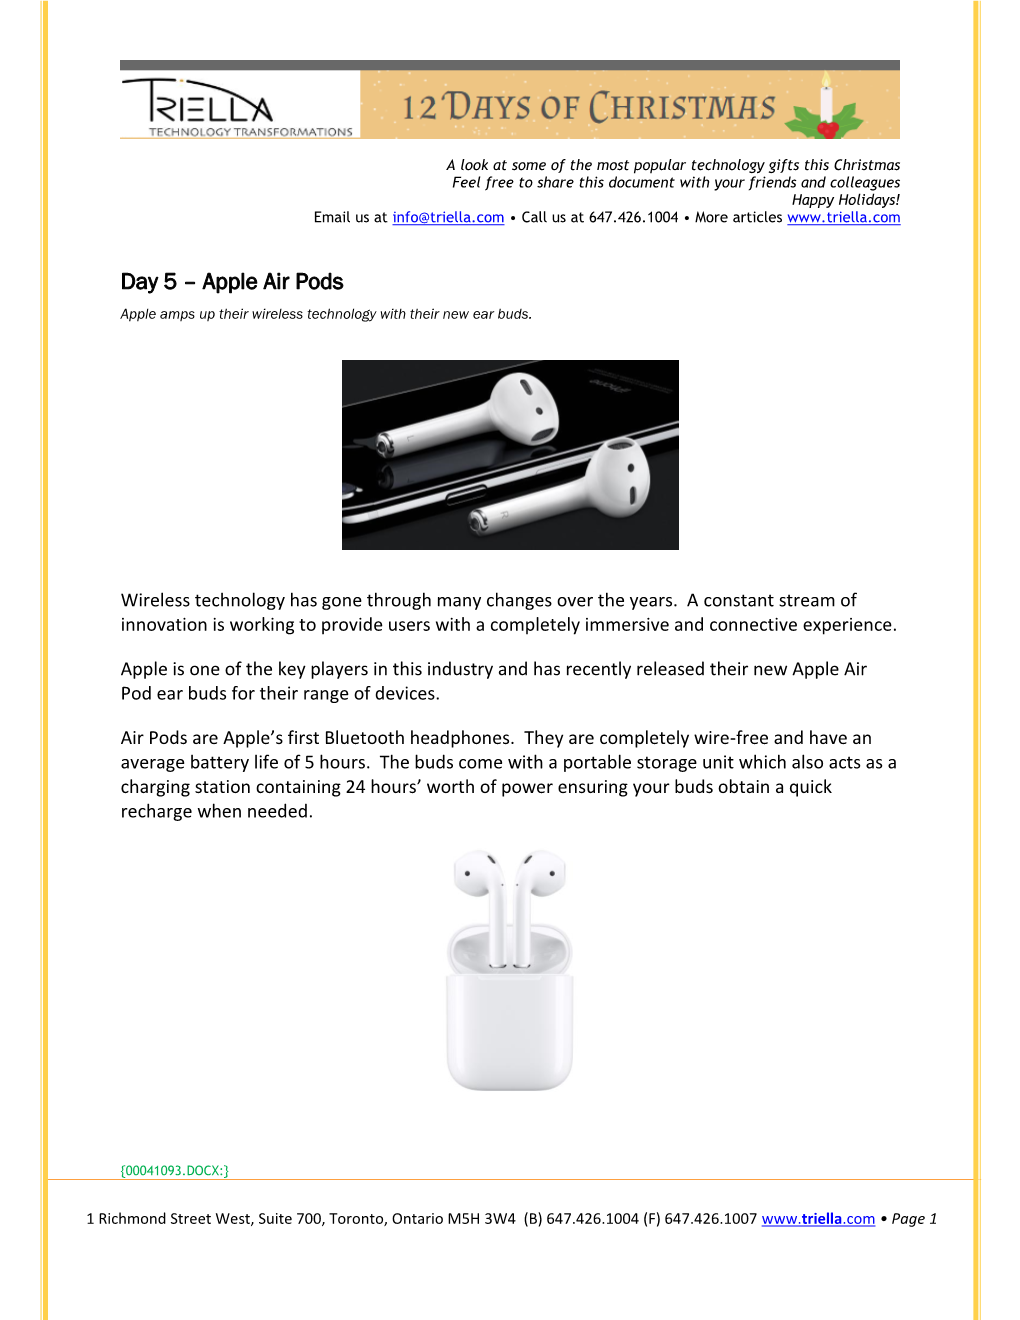 Apple Air Pods Apple Amps up Their Wireless Technology with Their New Ear Buds